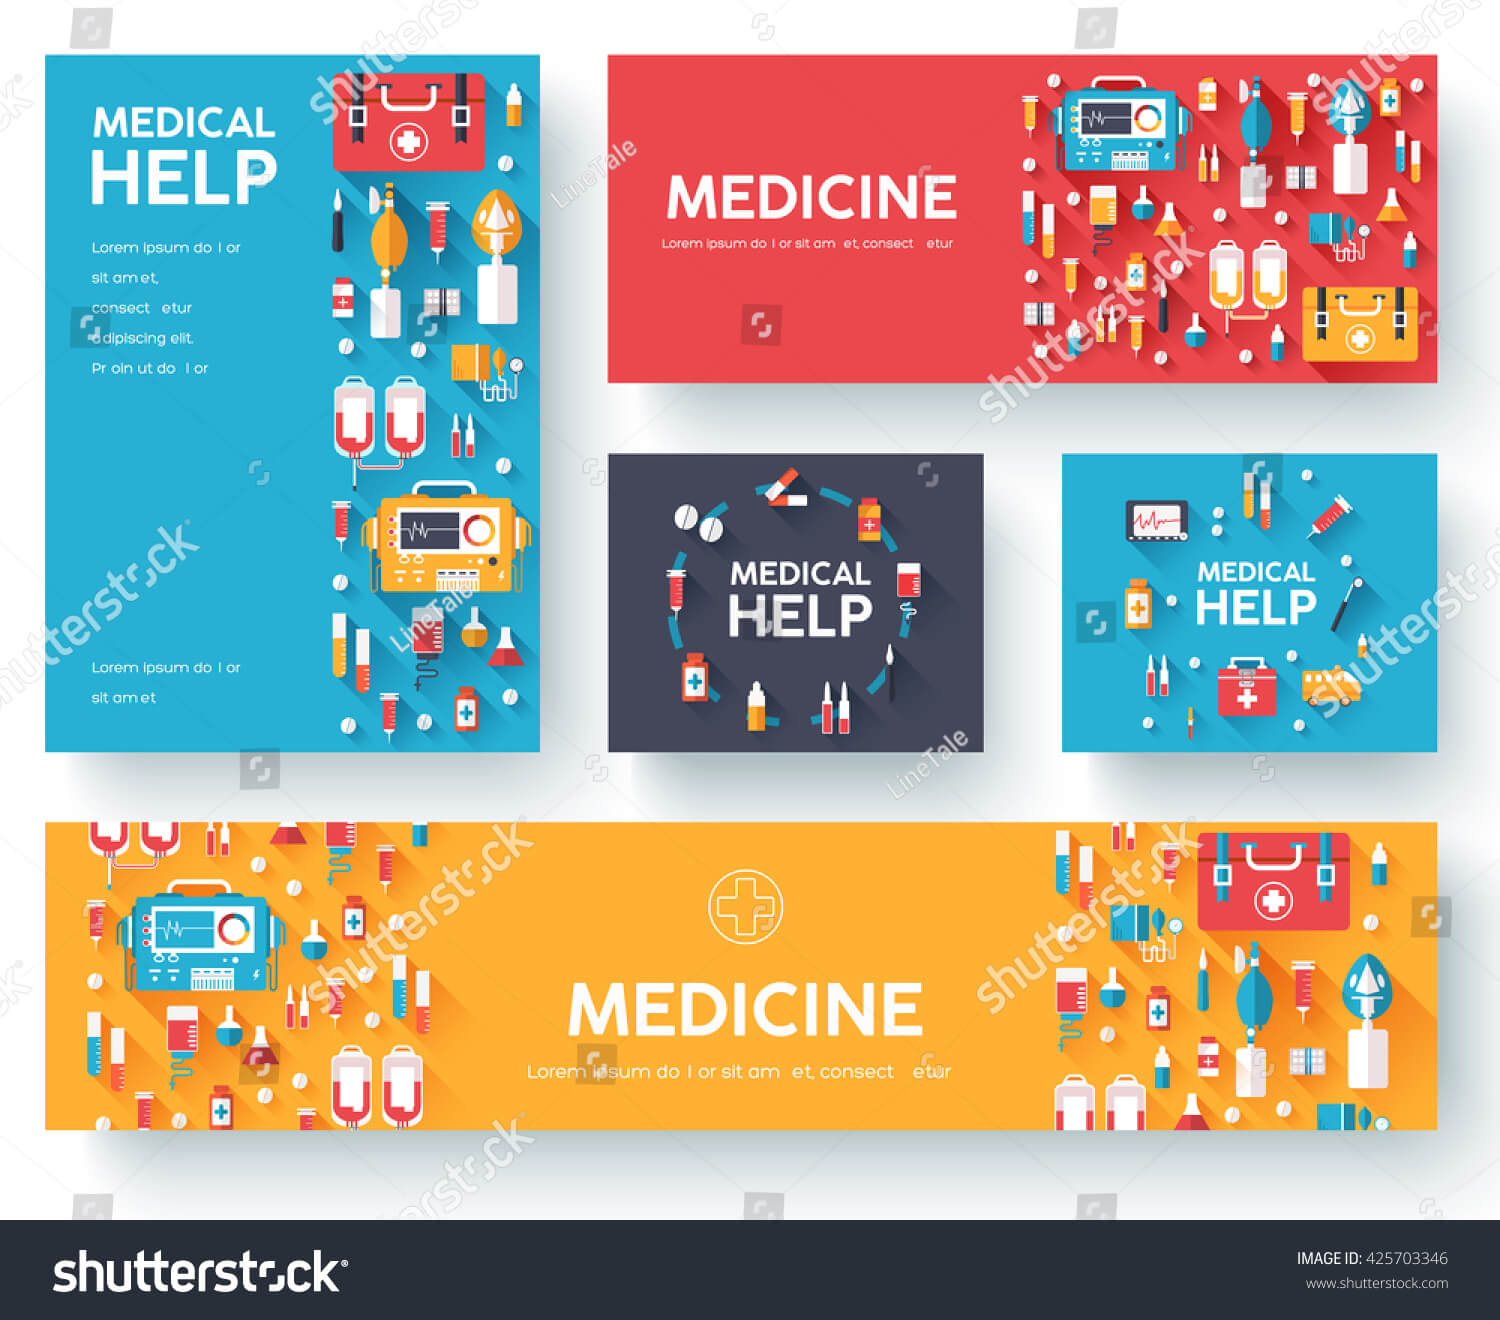 Medical Information Card Template ] – Information Card For In Case Of Emergency Card Template